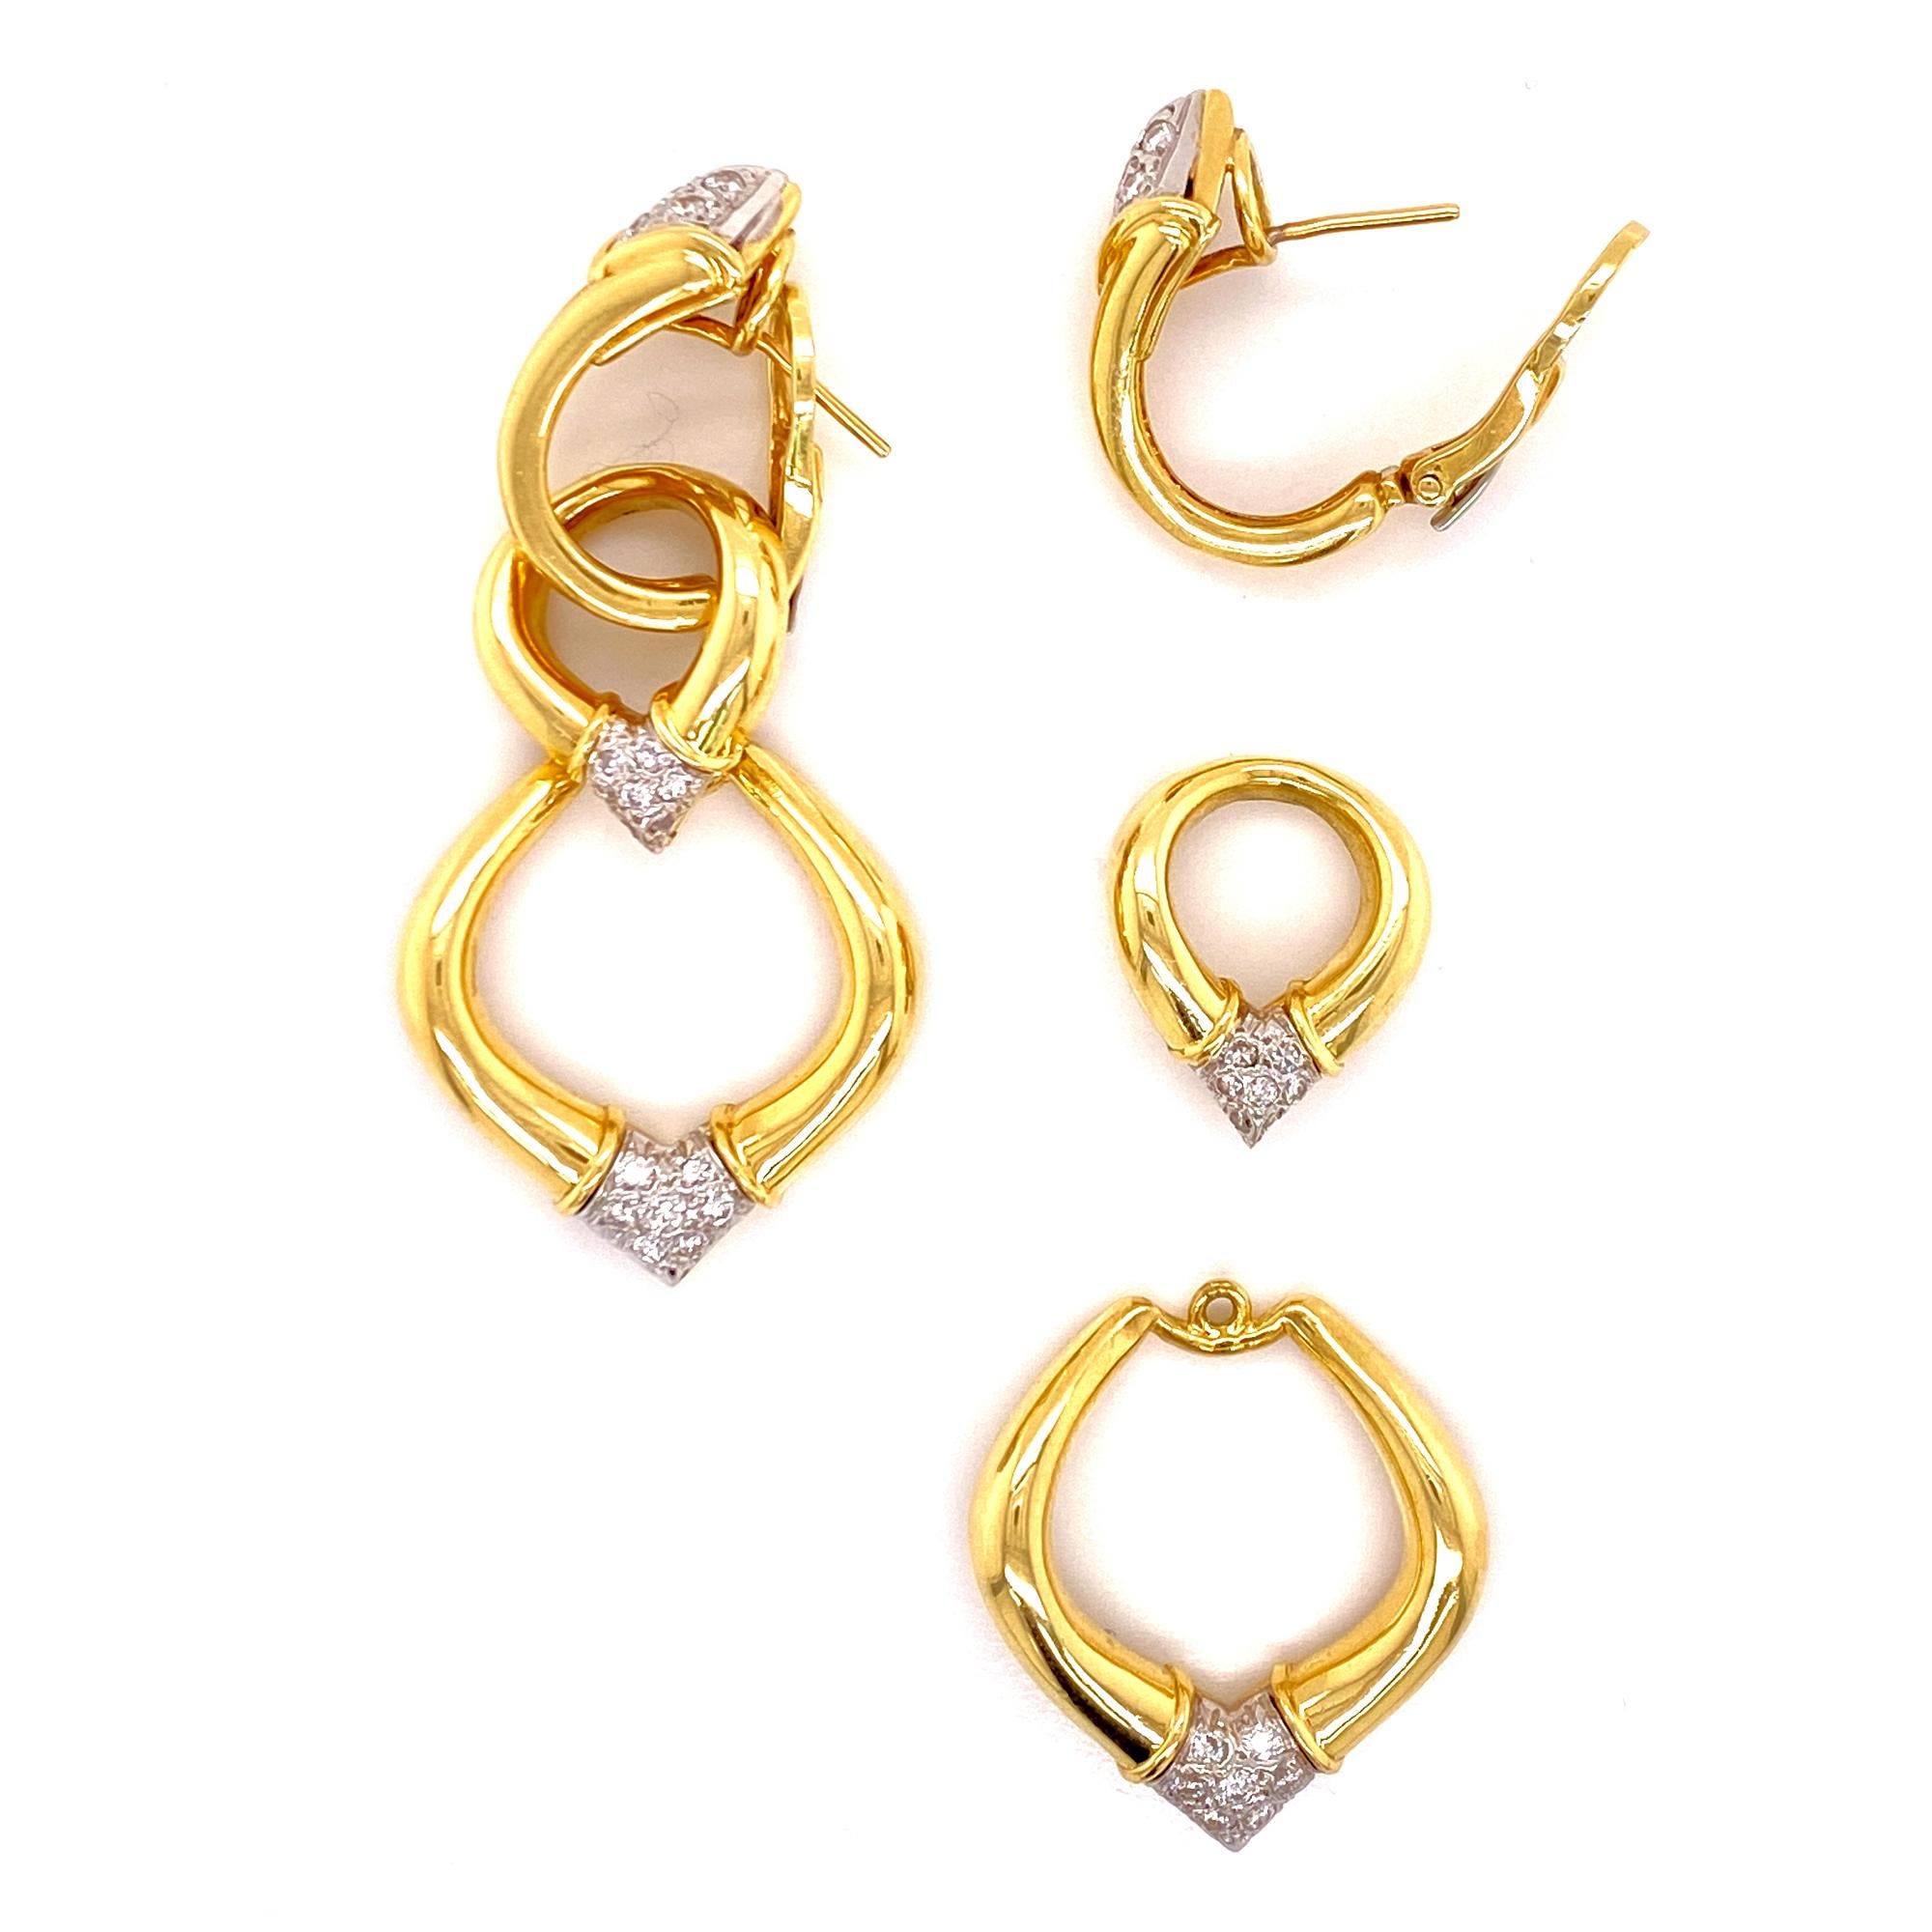 Stunning diamond dangle earrings fashioned in 18 karat yellow gold. The earrings feature round brilliant cut diamonds graded G-H color and VS clarity. The detachable links allow the earrings to be worn at 3 different lengths. The earrings measure 2